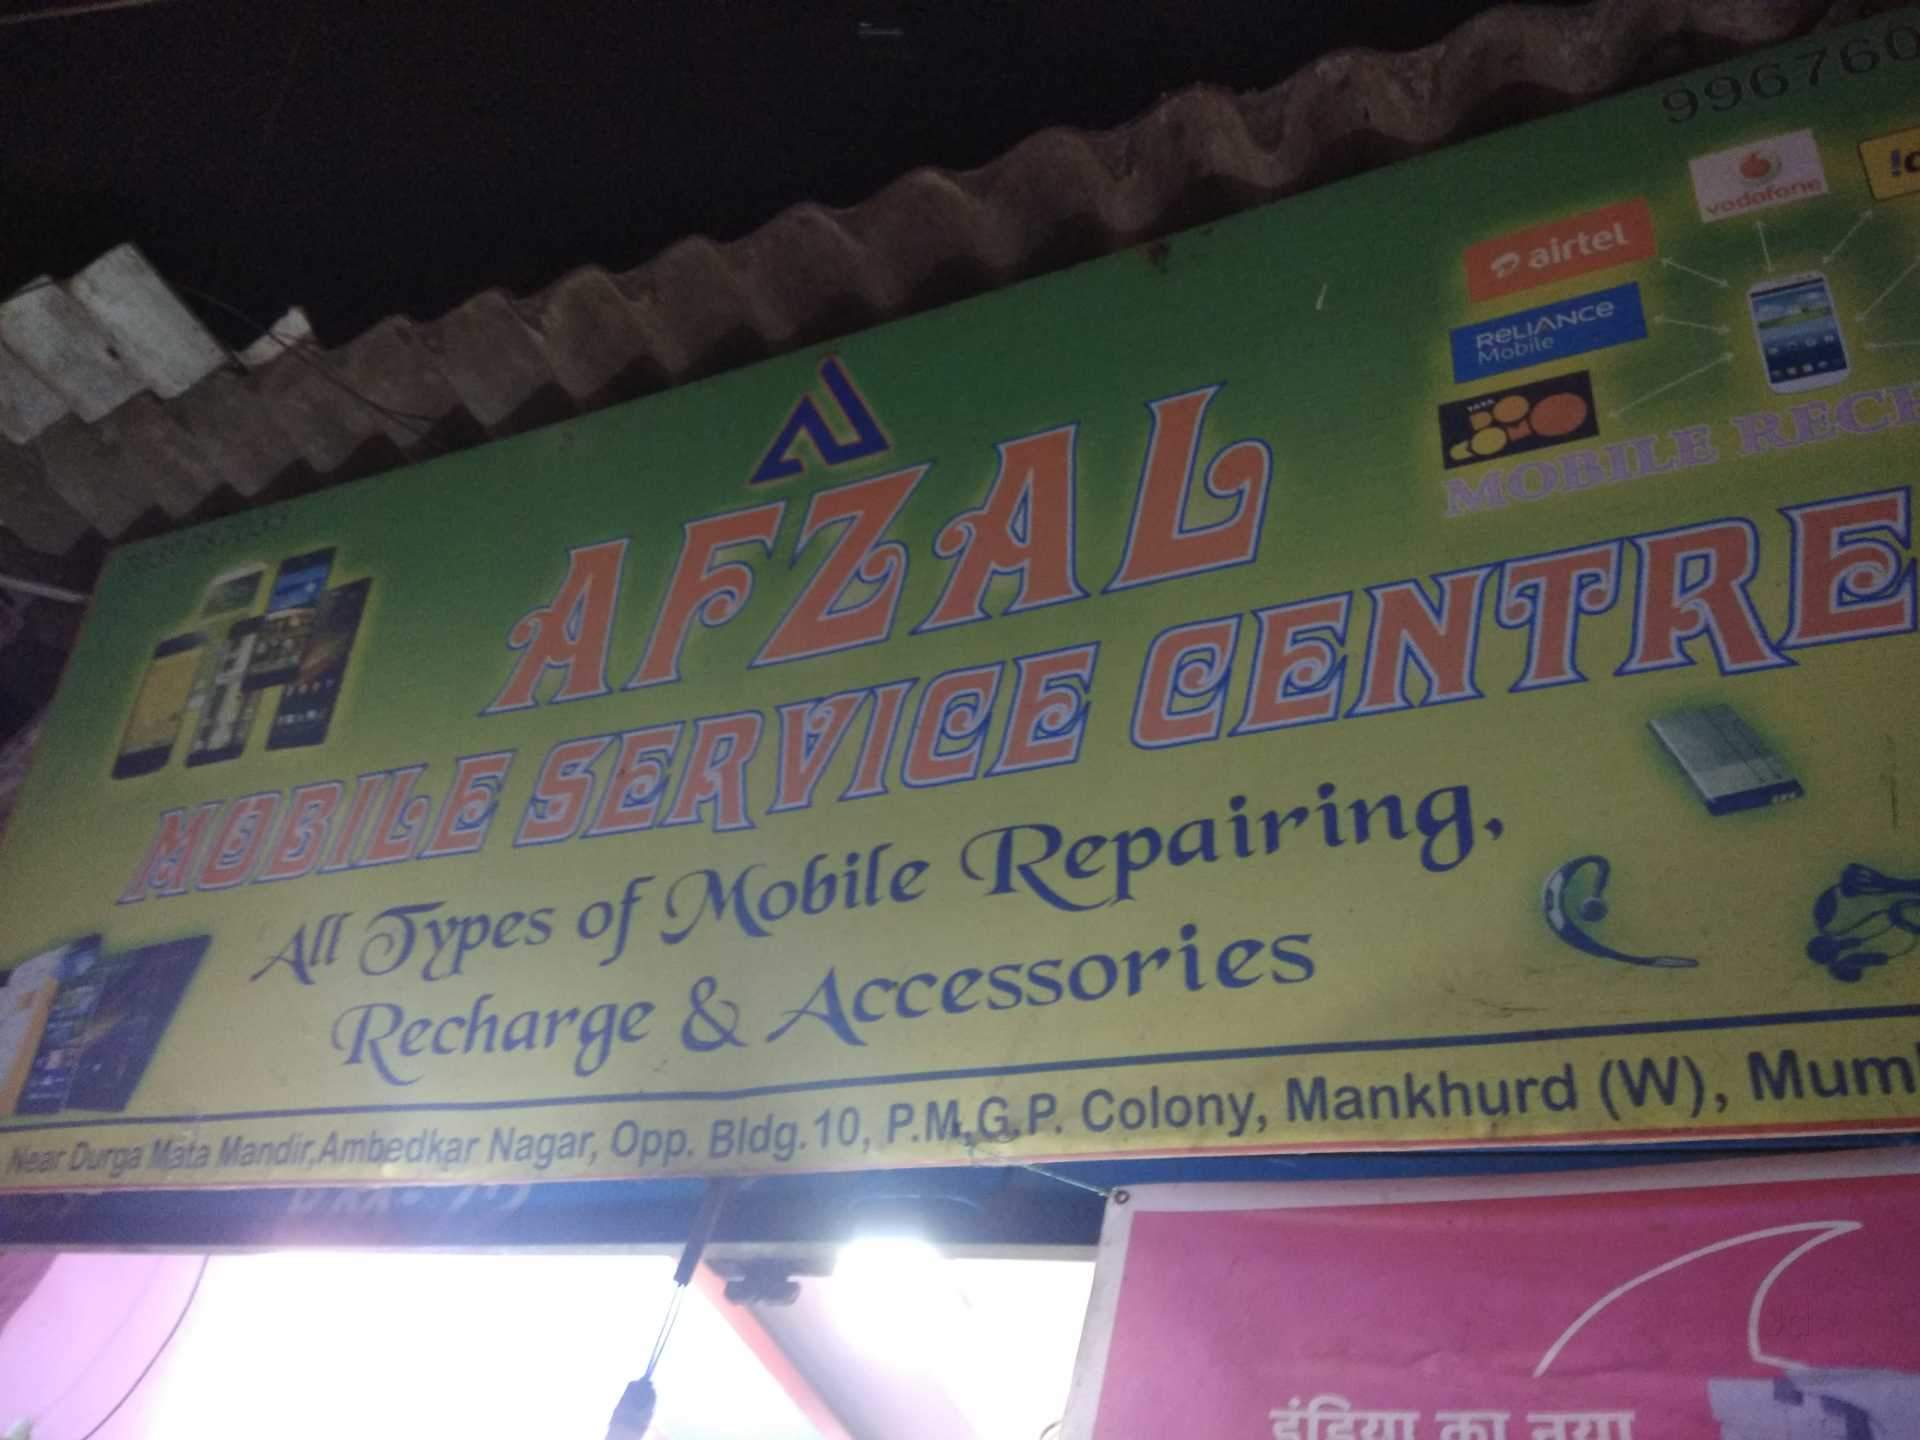 Afzal Mobile Service Center, Mankhurd - Handwriting , HD Wallpaper & Backgrounds